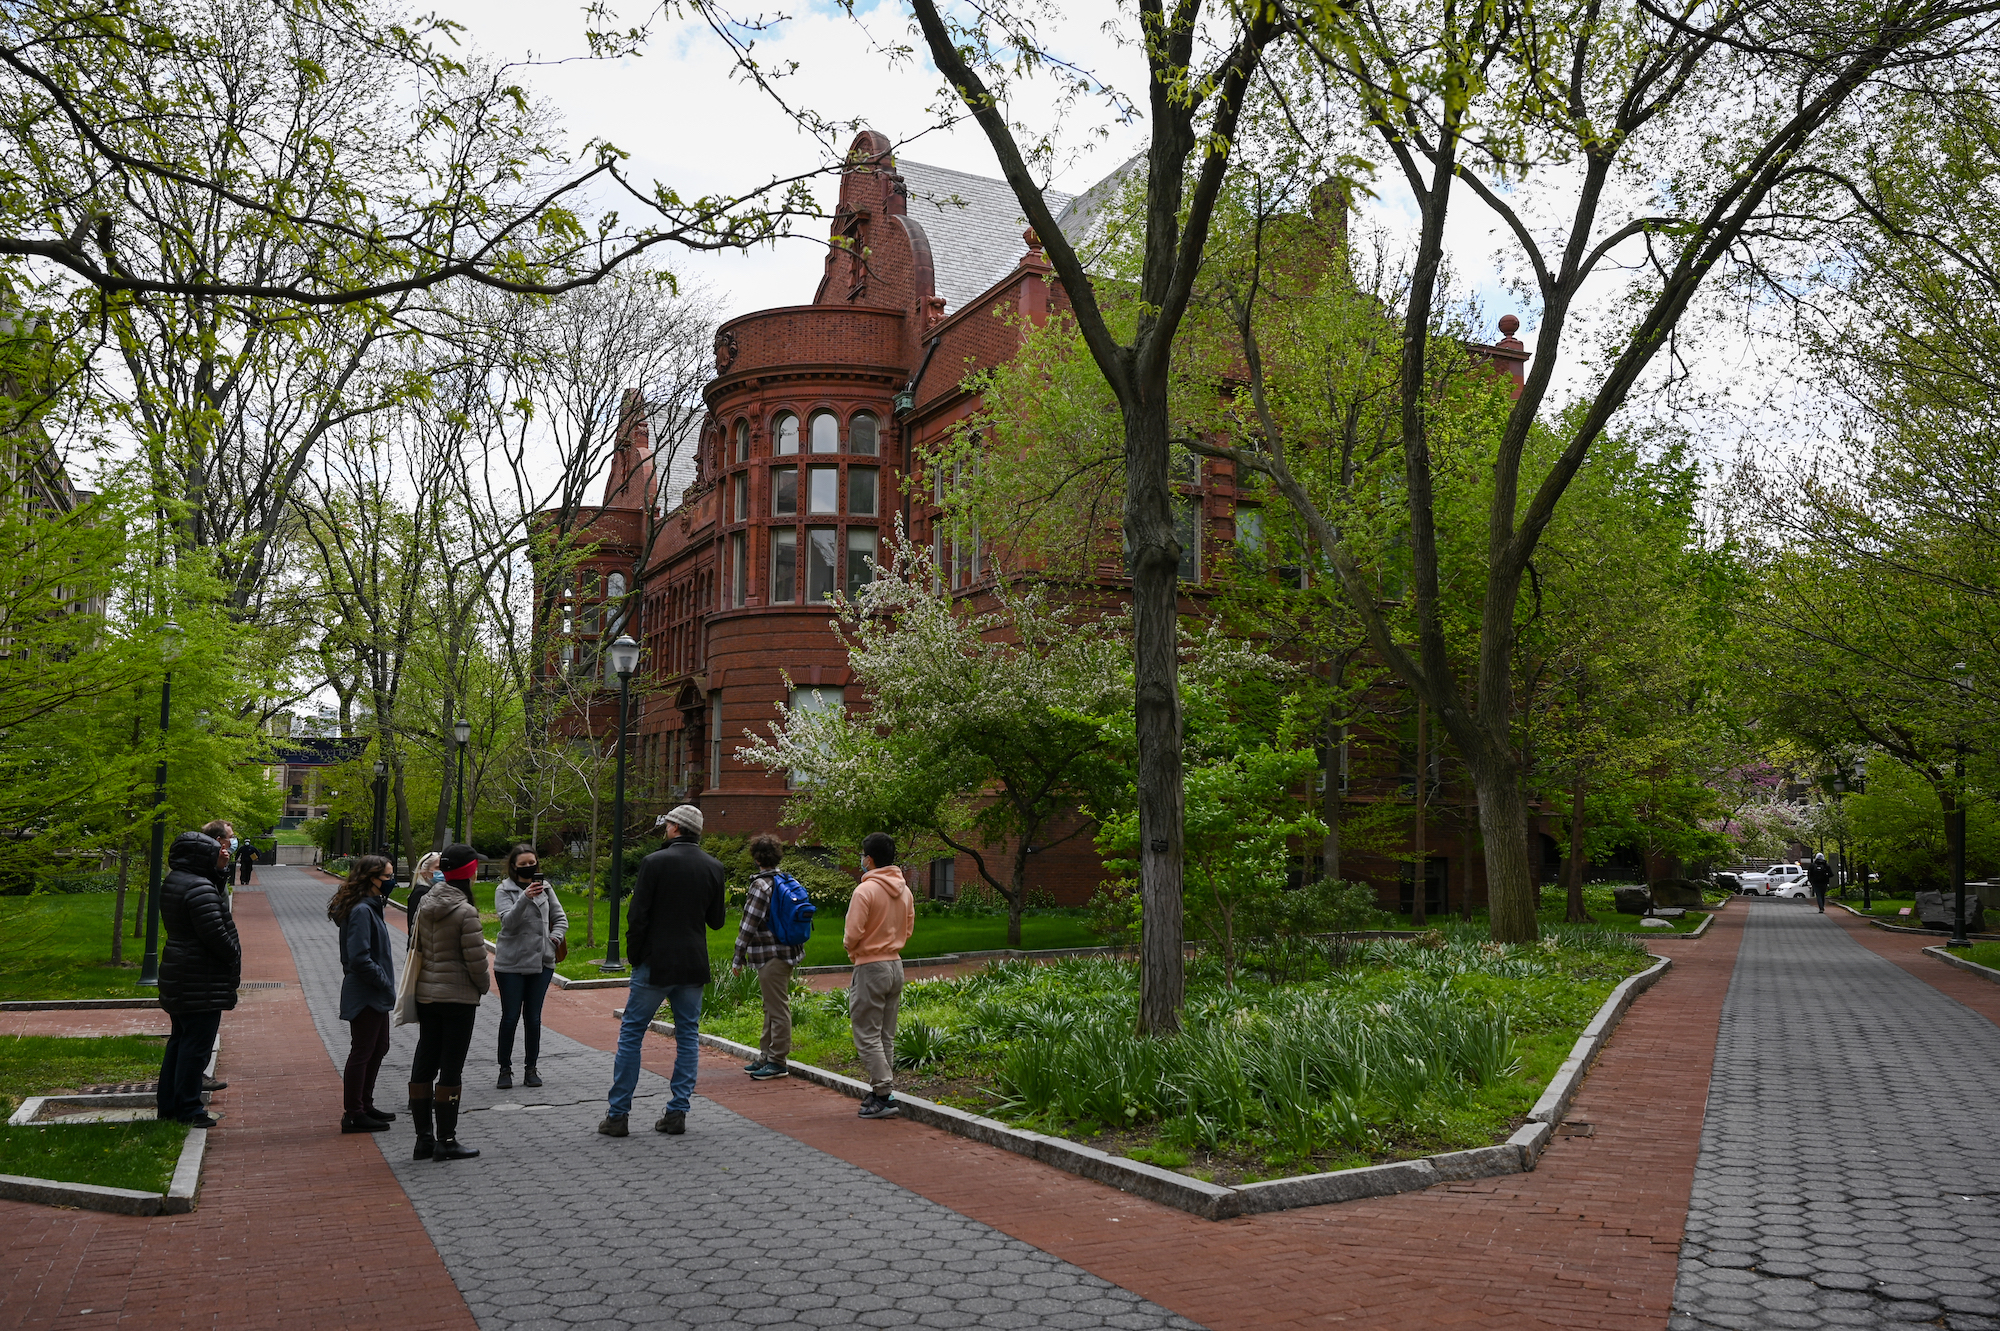 ecology tour of Penn campus showing spring landscape and building